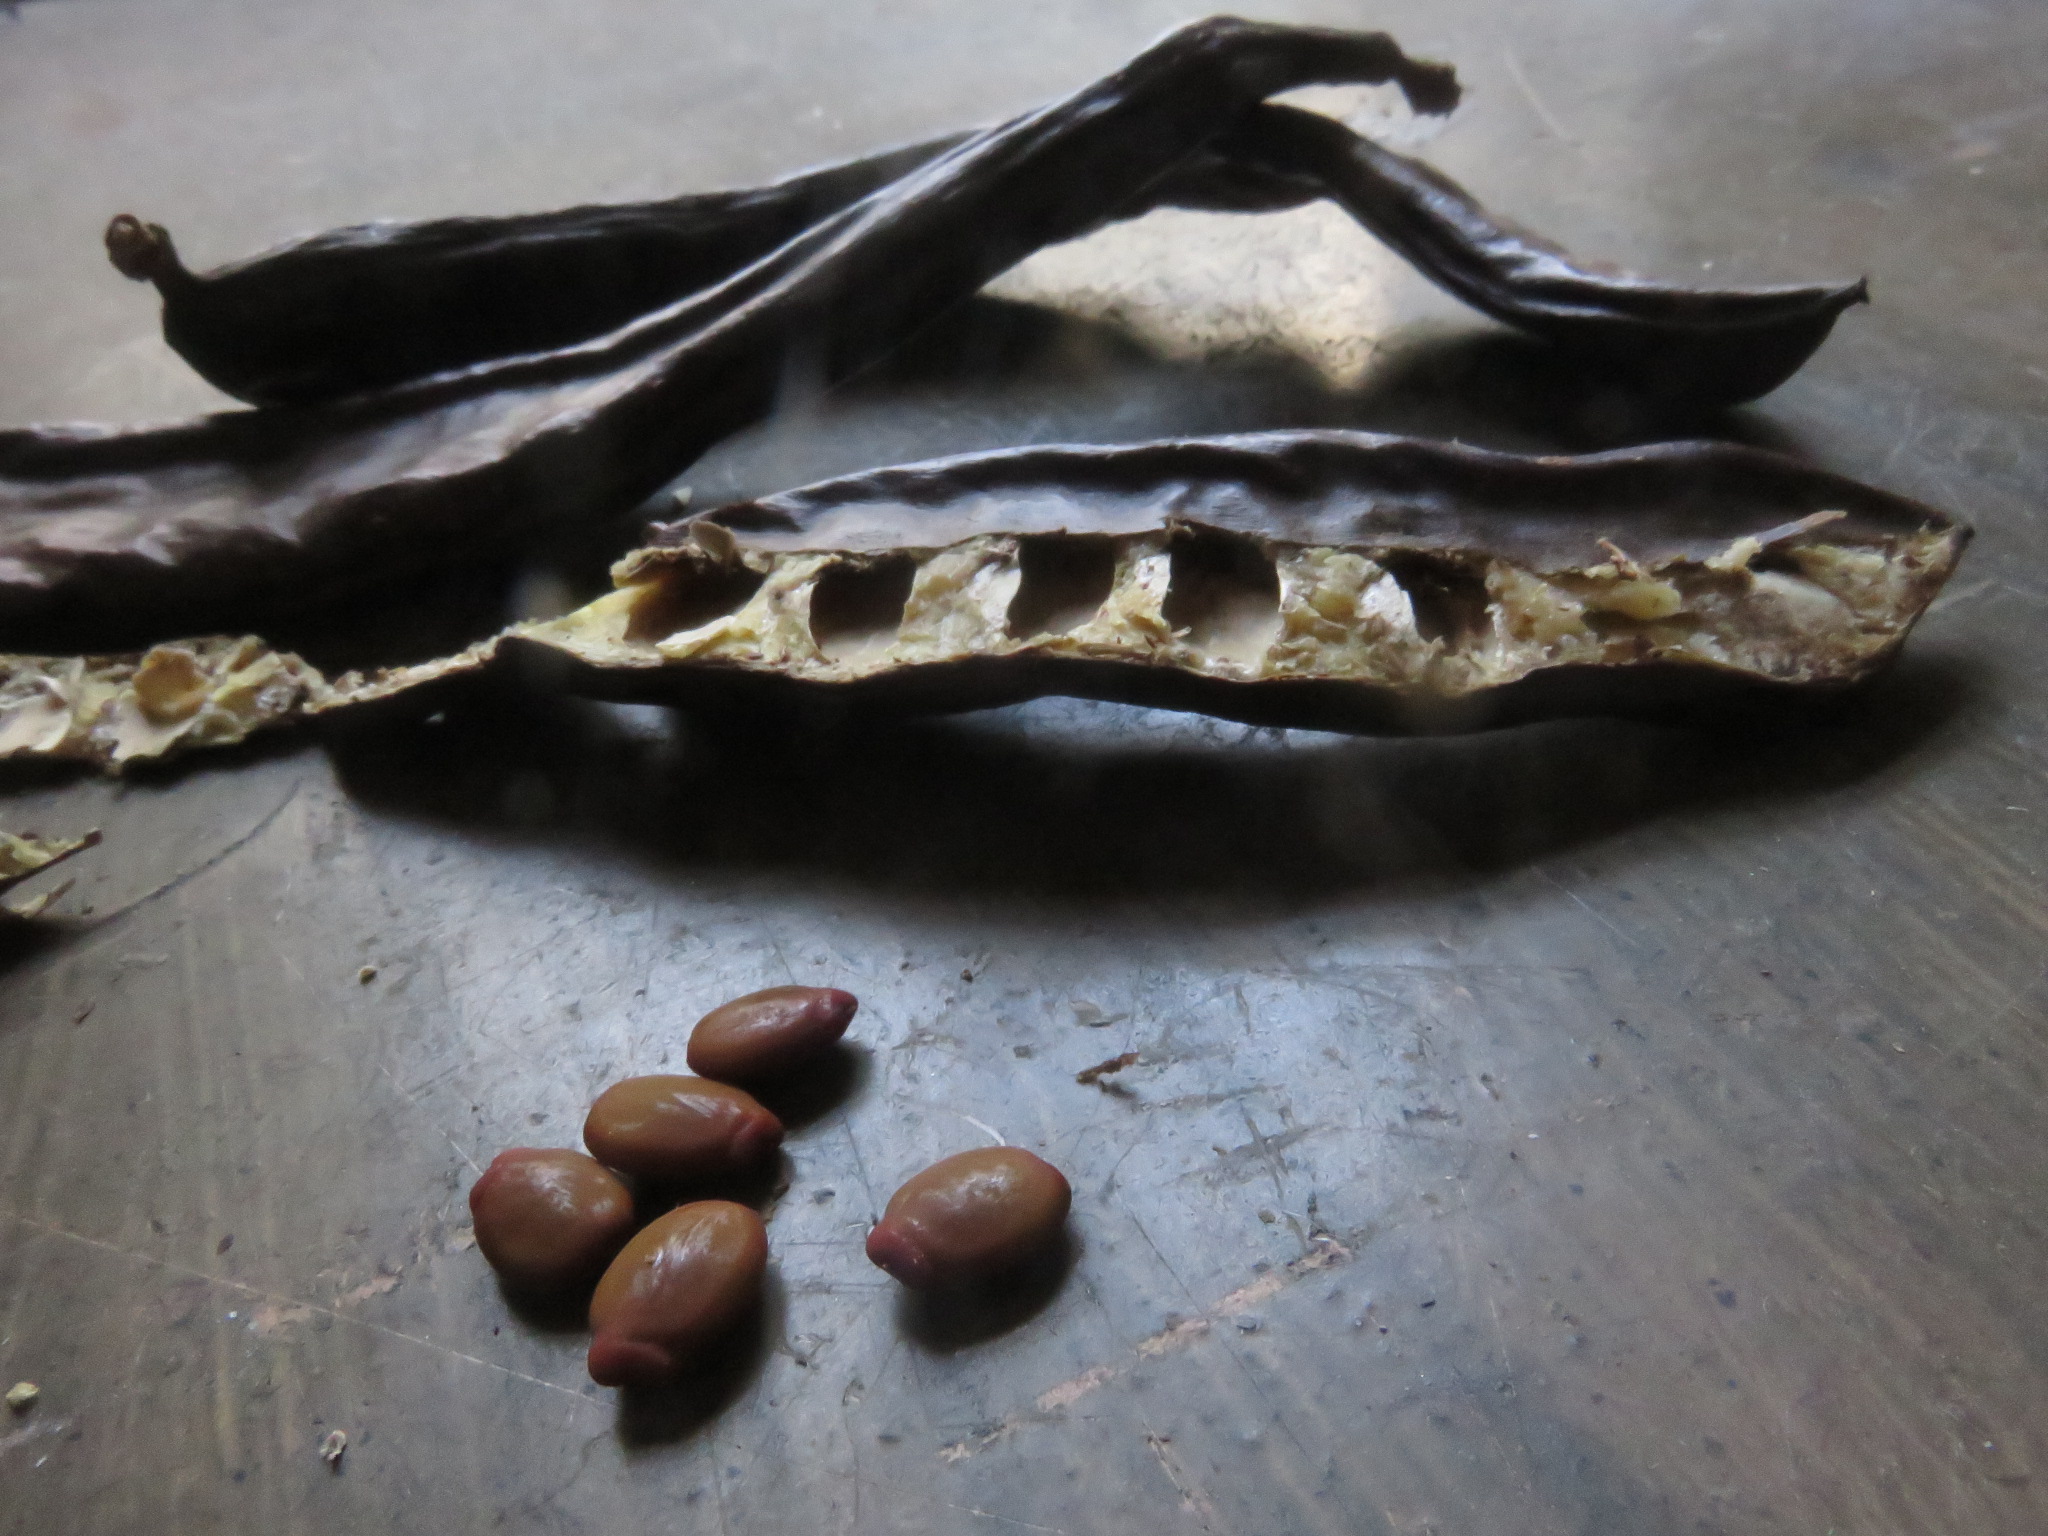 Carob seeds are delicious and the plants trees are really easy to grow in our climate.